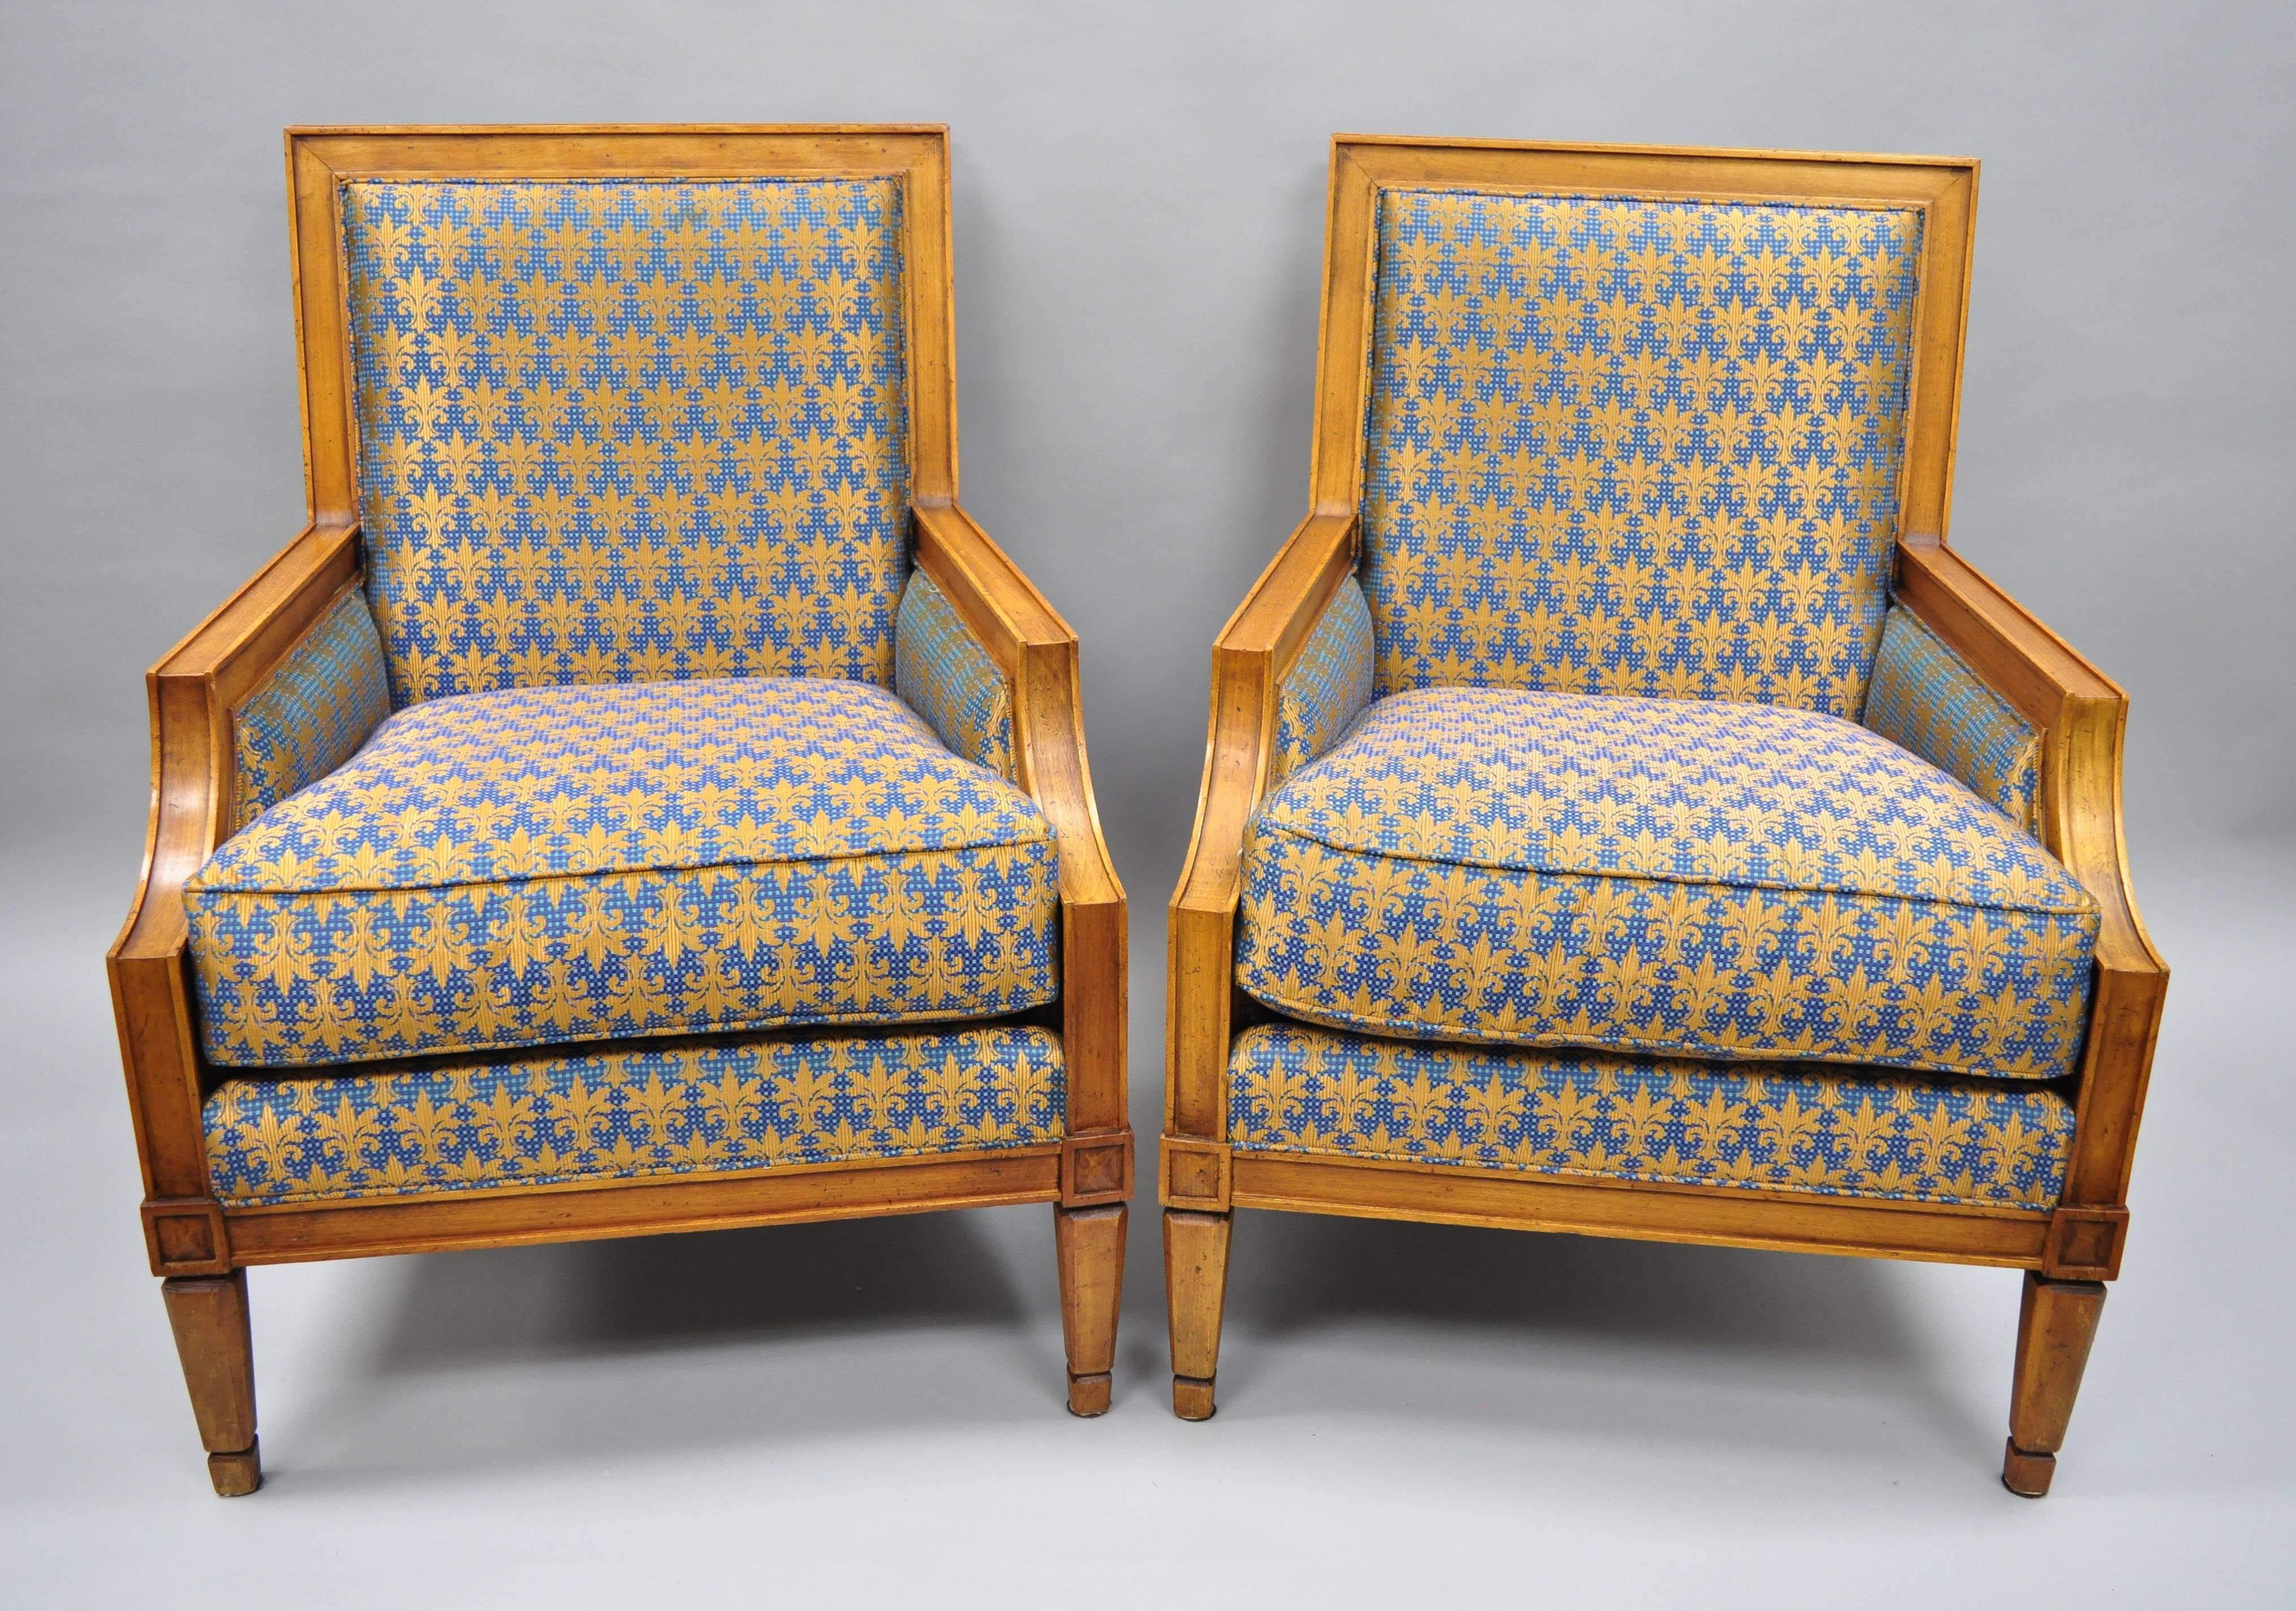 Vintage Baker furniture French Regency / neoclassical style armchairs in the Barbara Barry style. Item features X- form backs, regal blue and gold fabric, solid wood construction, distressed finish, original label, tapered legs, quality American